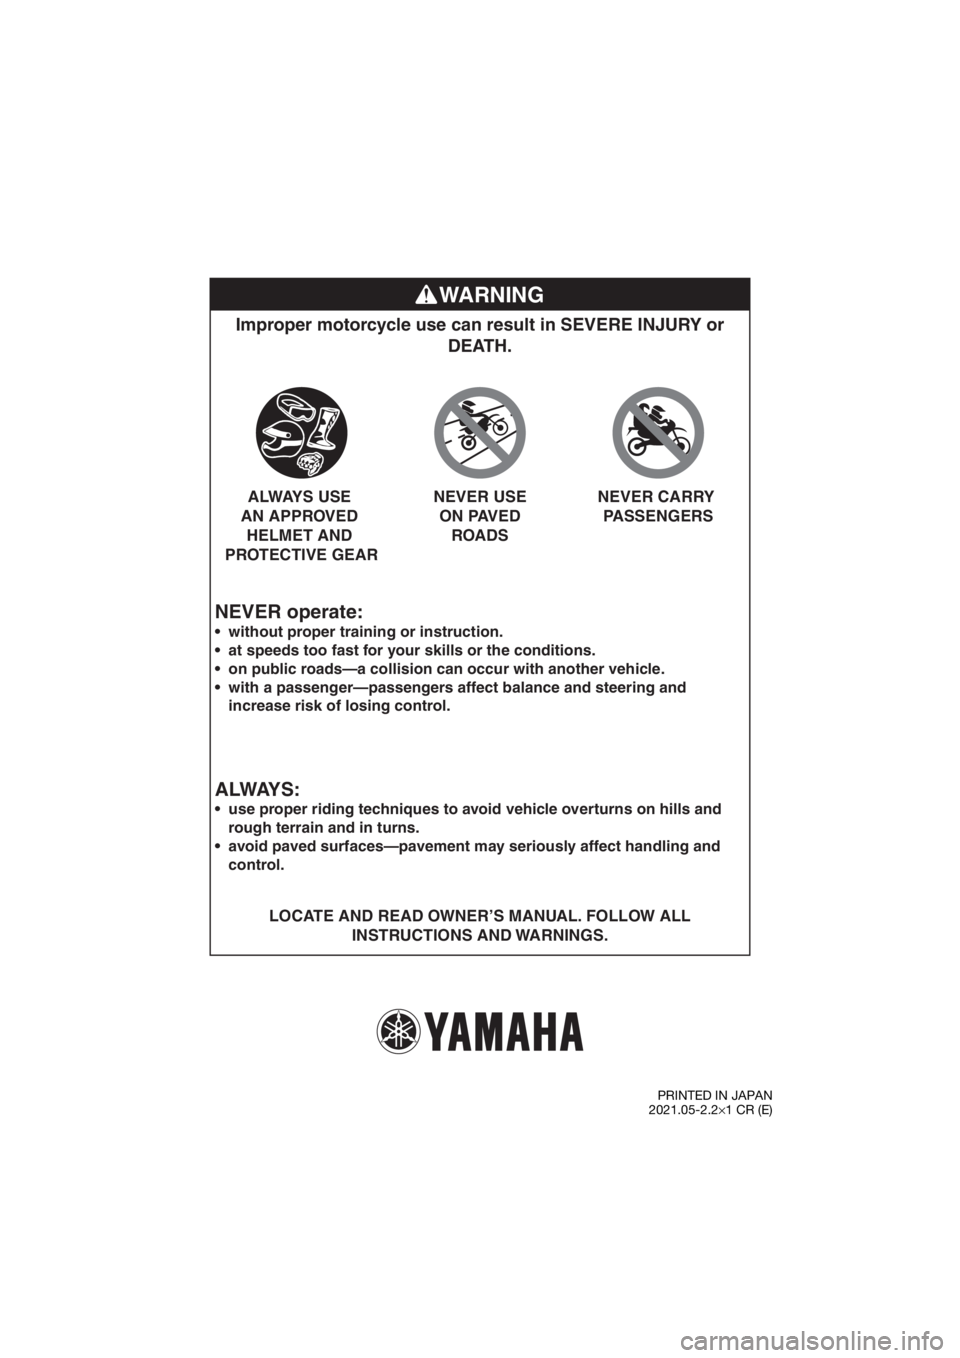 YAMAHA PW50 2022  Owners Manual WARNING
NEVER operate:
Improper motorcycle use can result in SEVERE INJURY or DEATH.
LOCATE AND READ OWNER’S MANUAL. FOLLOW ALL 
INSTRUCTIONS AND WARNINGS.



without proper training or instruction.